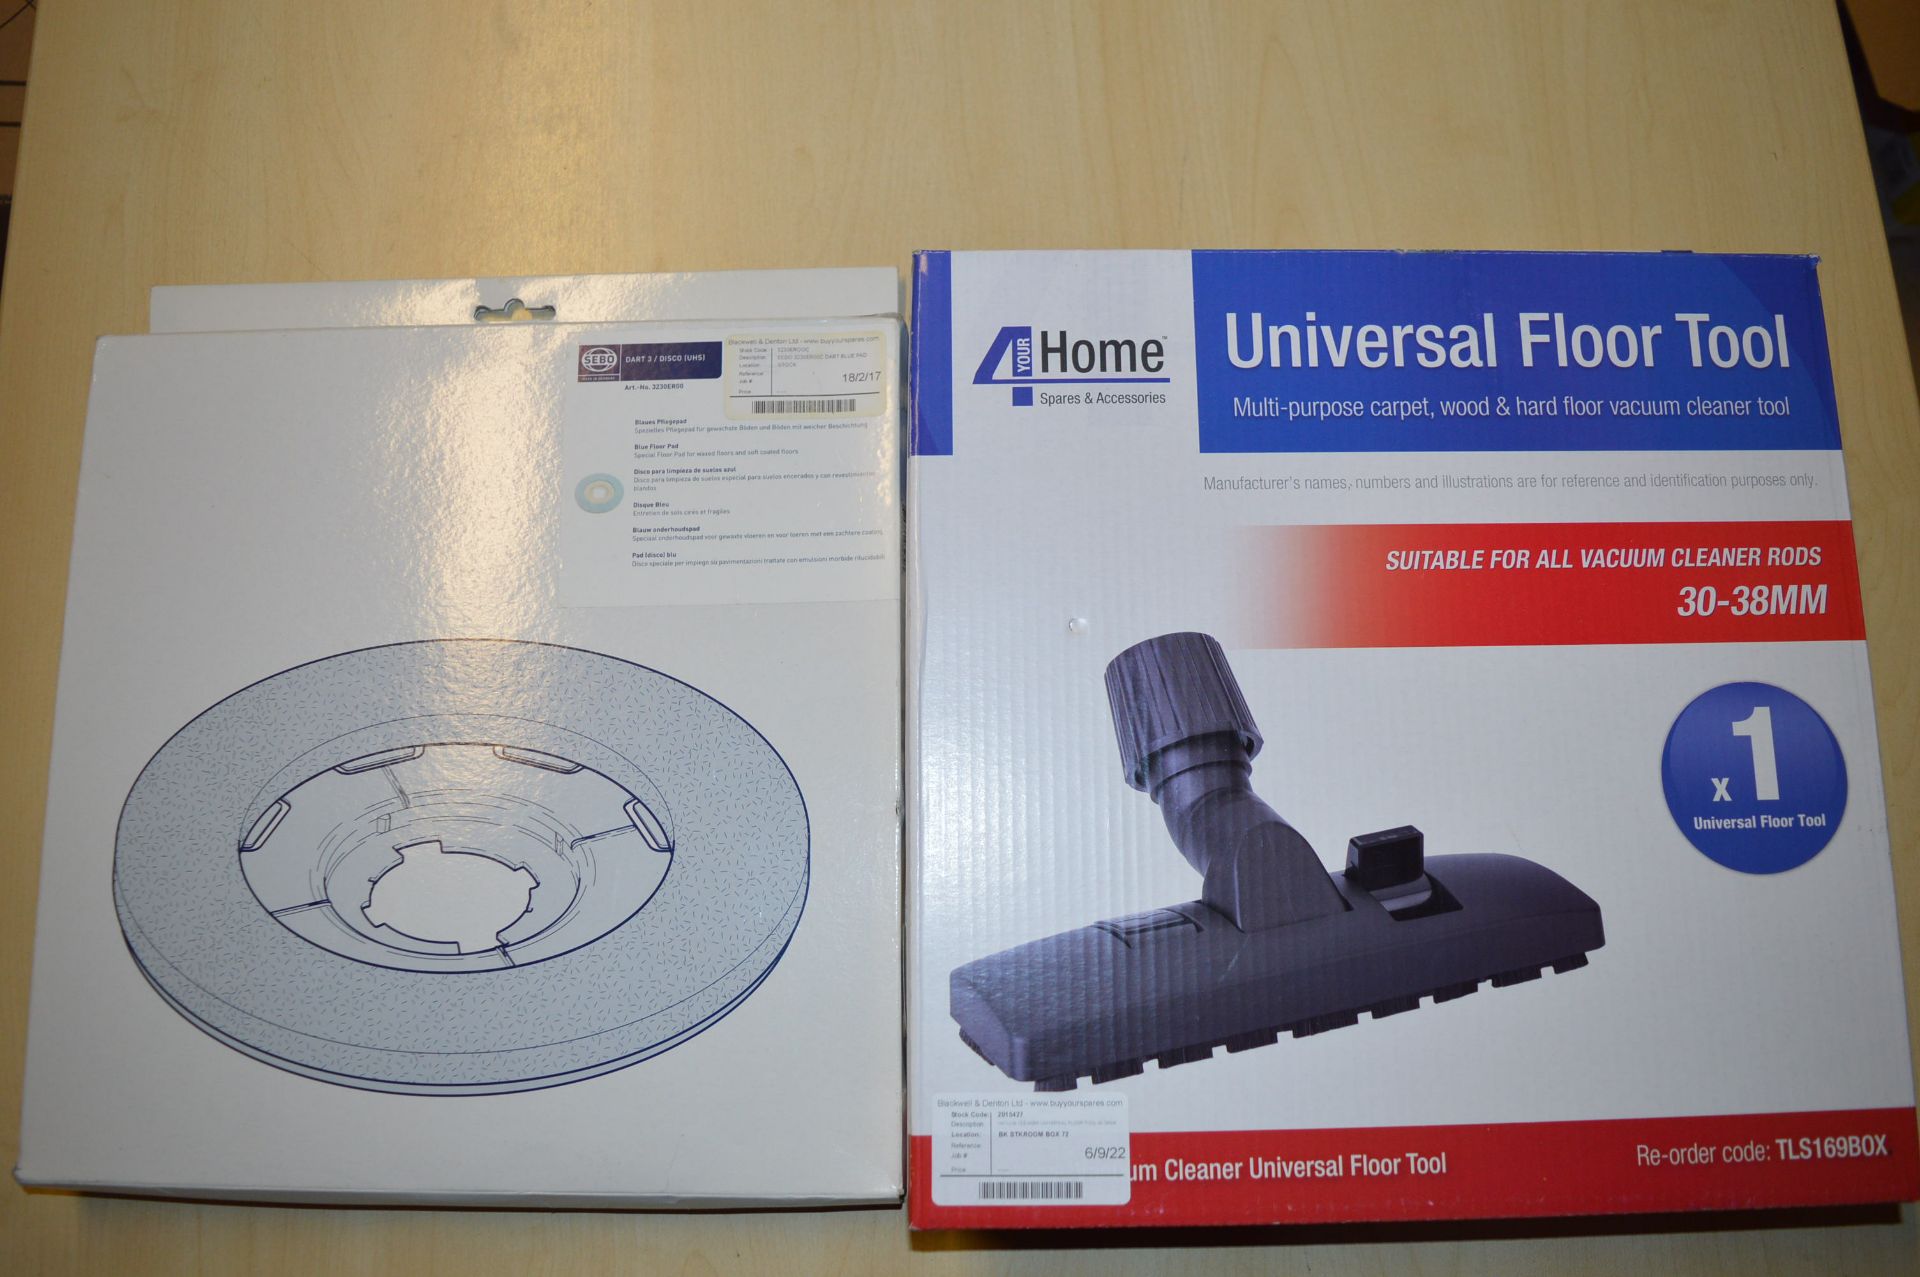 *4 Your Home Universal Floor Tool, and a Sebo Blue